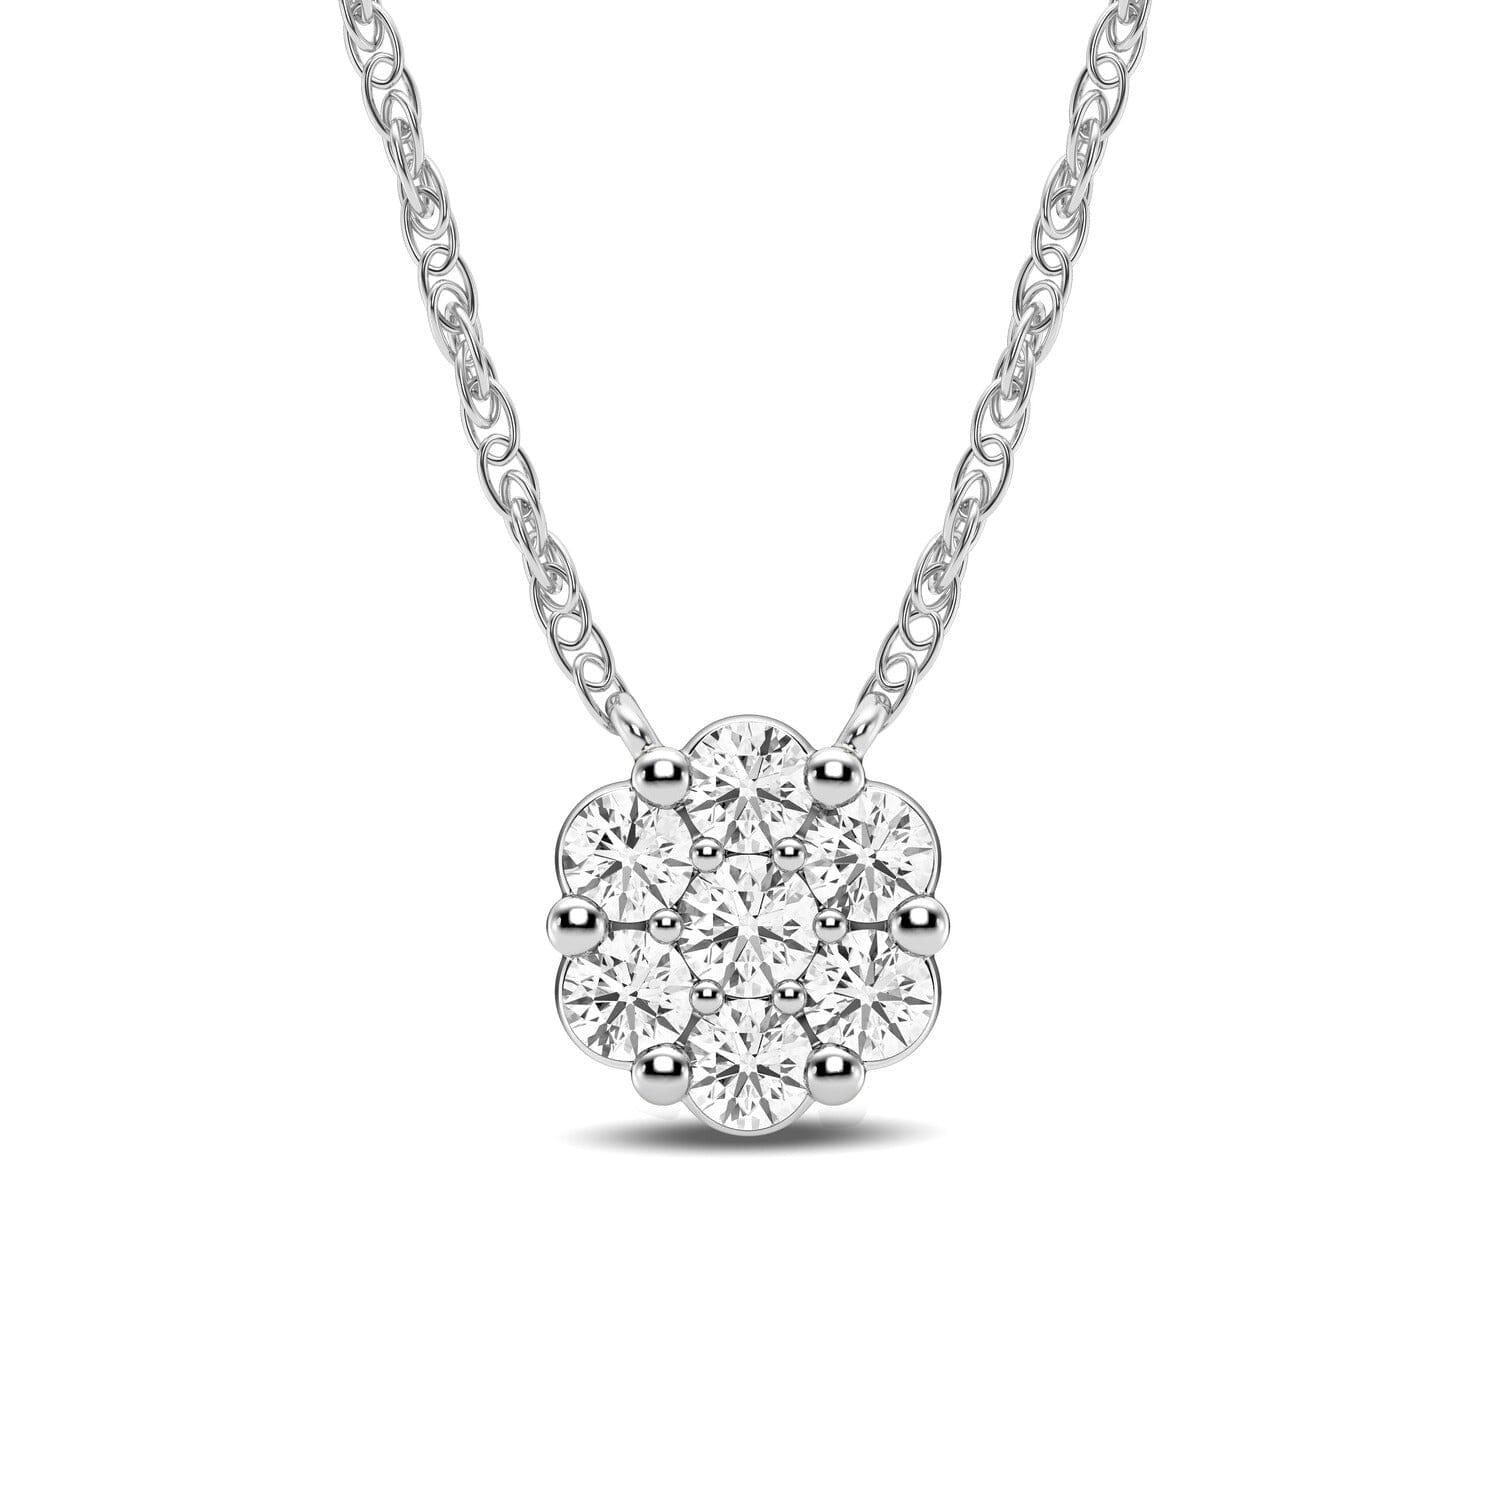 Meera Flower Necklace with 1/5ct of Laboratory Grown Diamonds in 9ct White Gold Necklaces Bevilles 